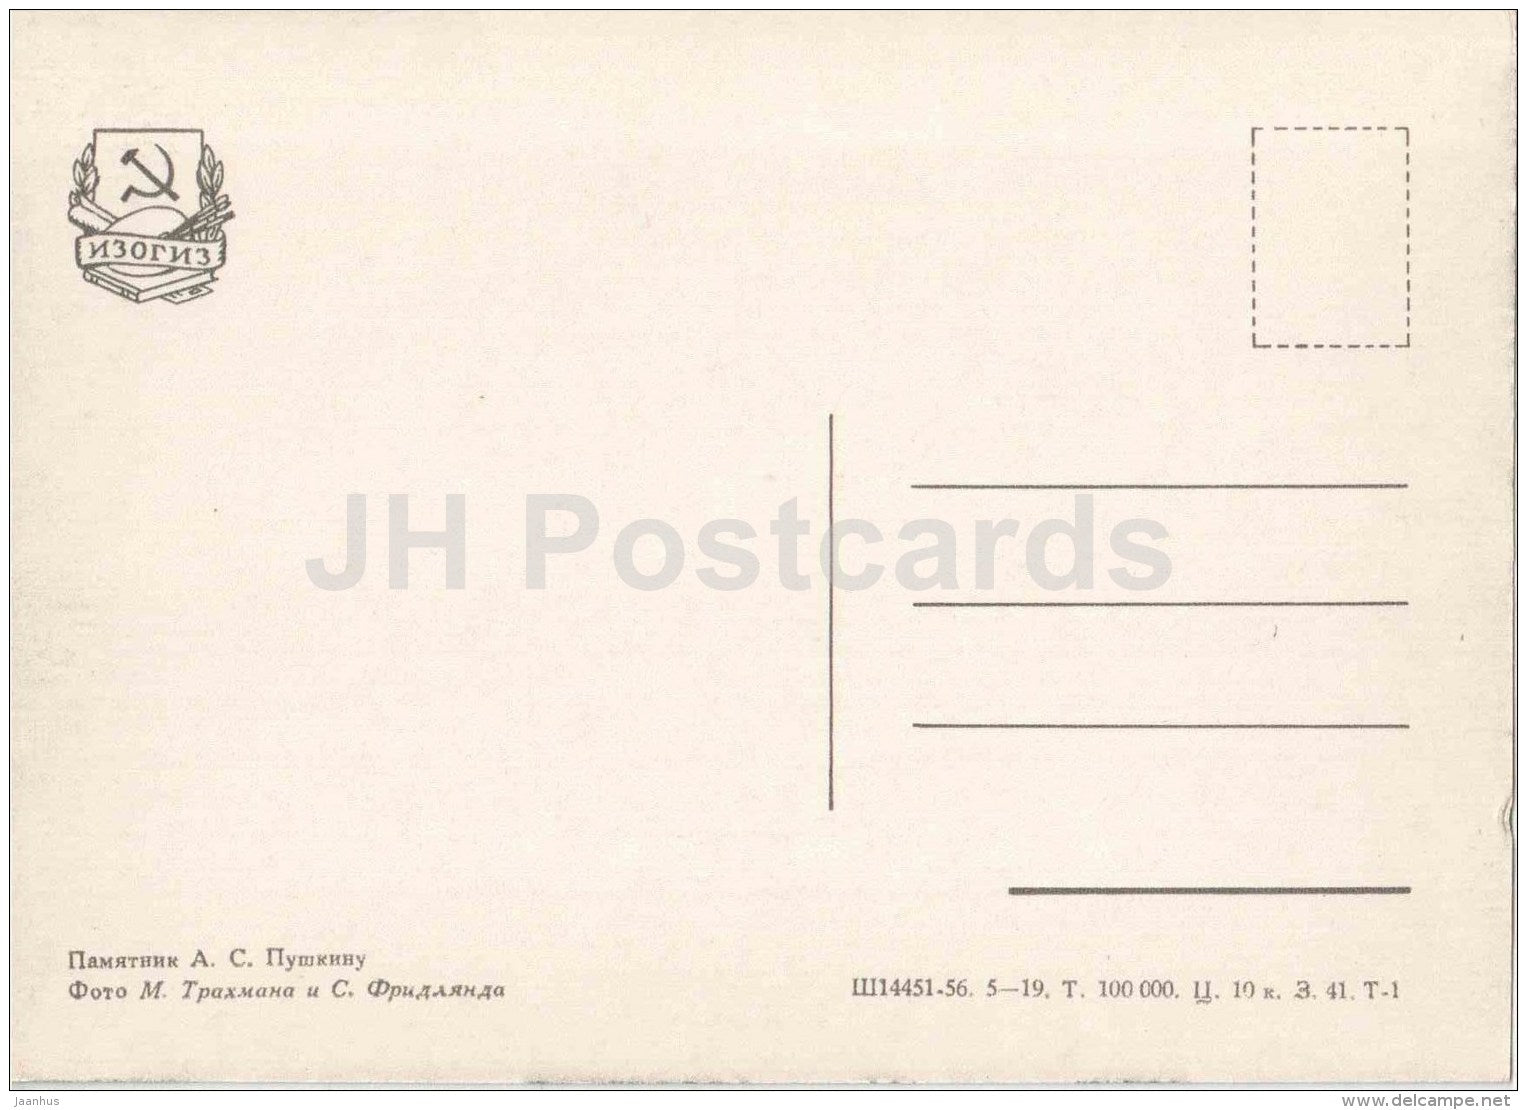 monument to russian poet A. Pushkin - Moscow - 1957 - Russia USSR - unused - JH Postcards